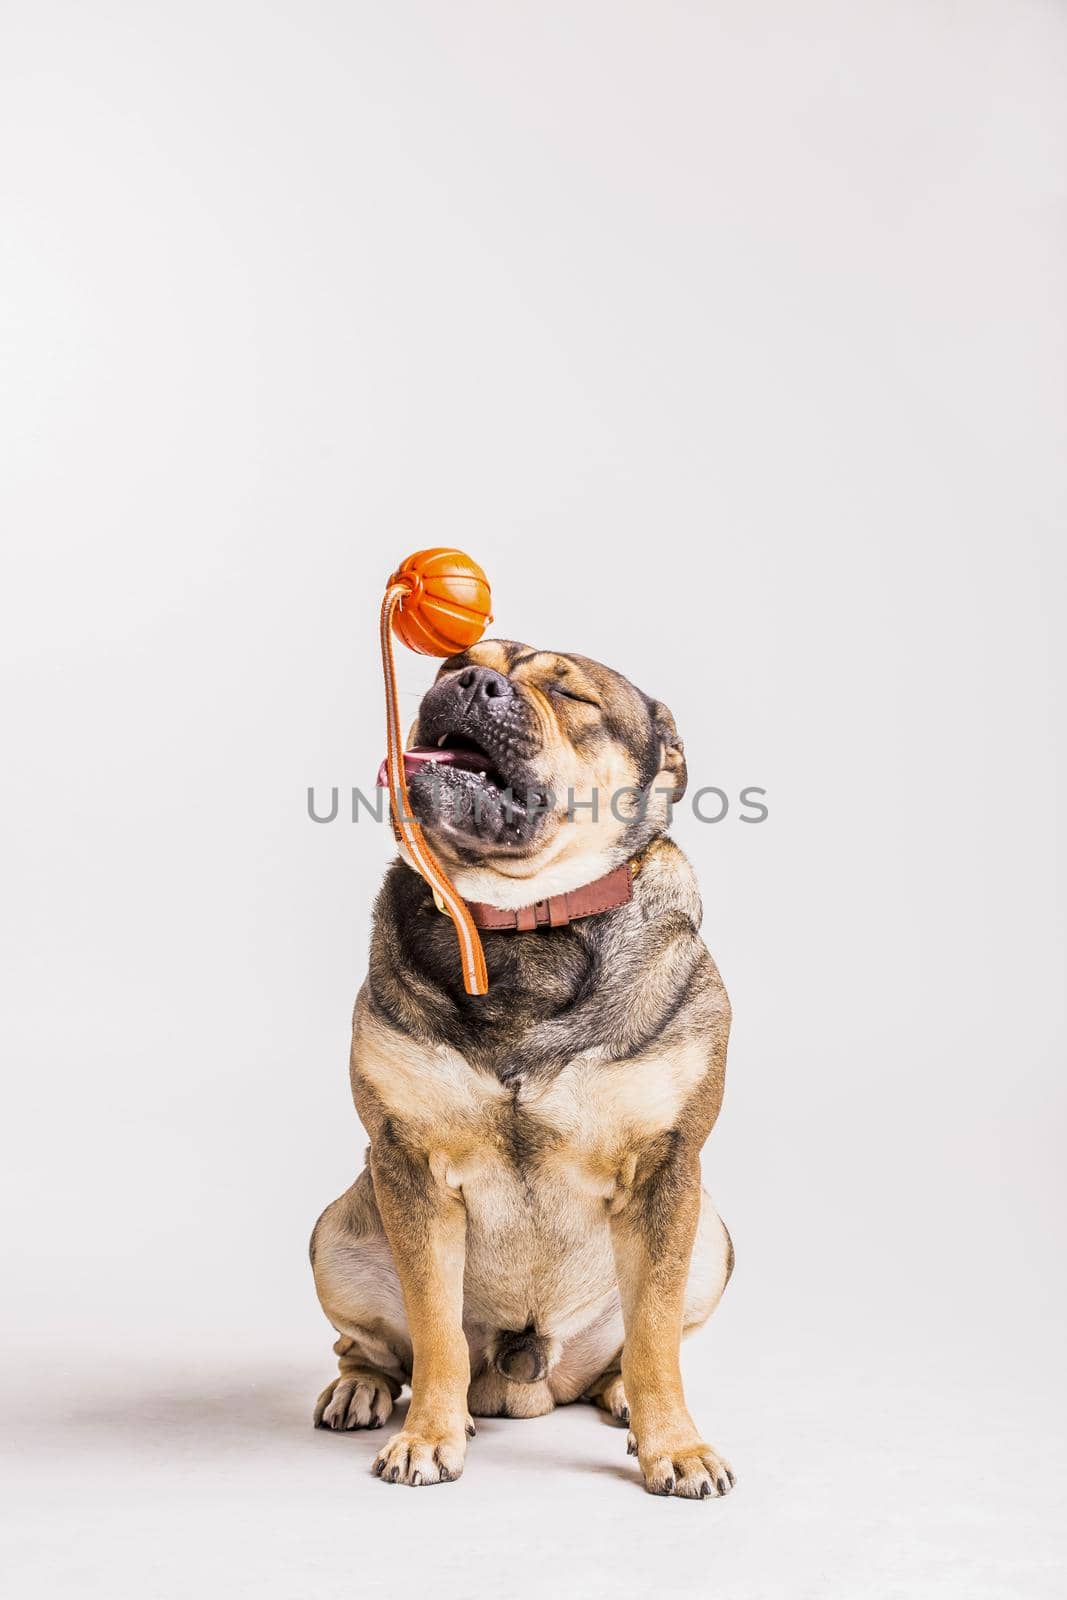 bulldog playing with toy over white background by Zahard